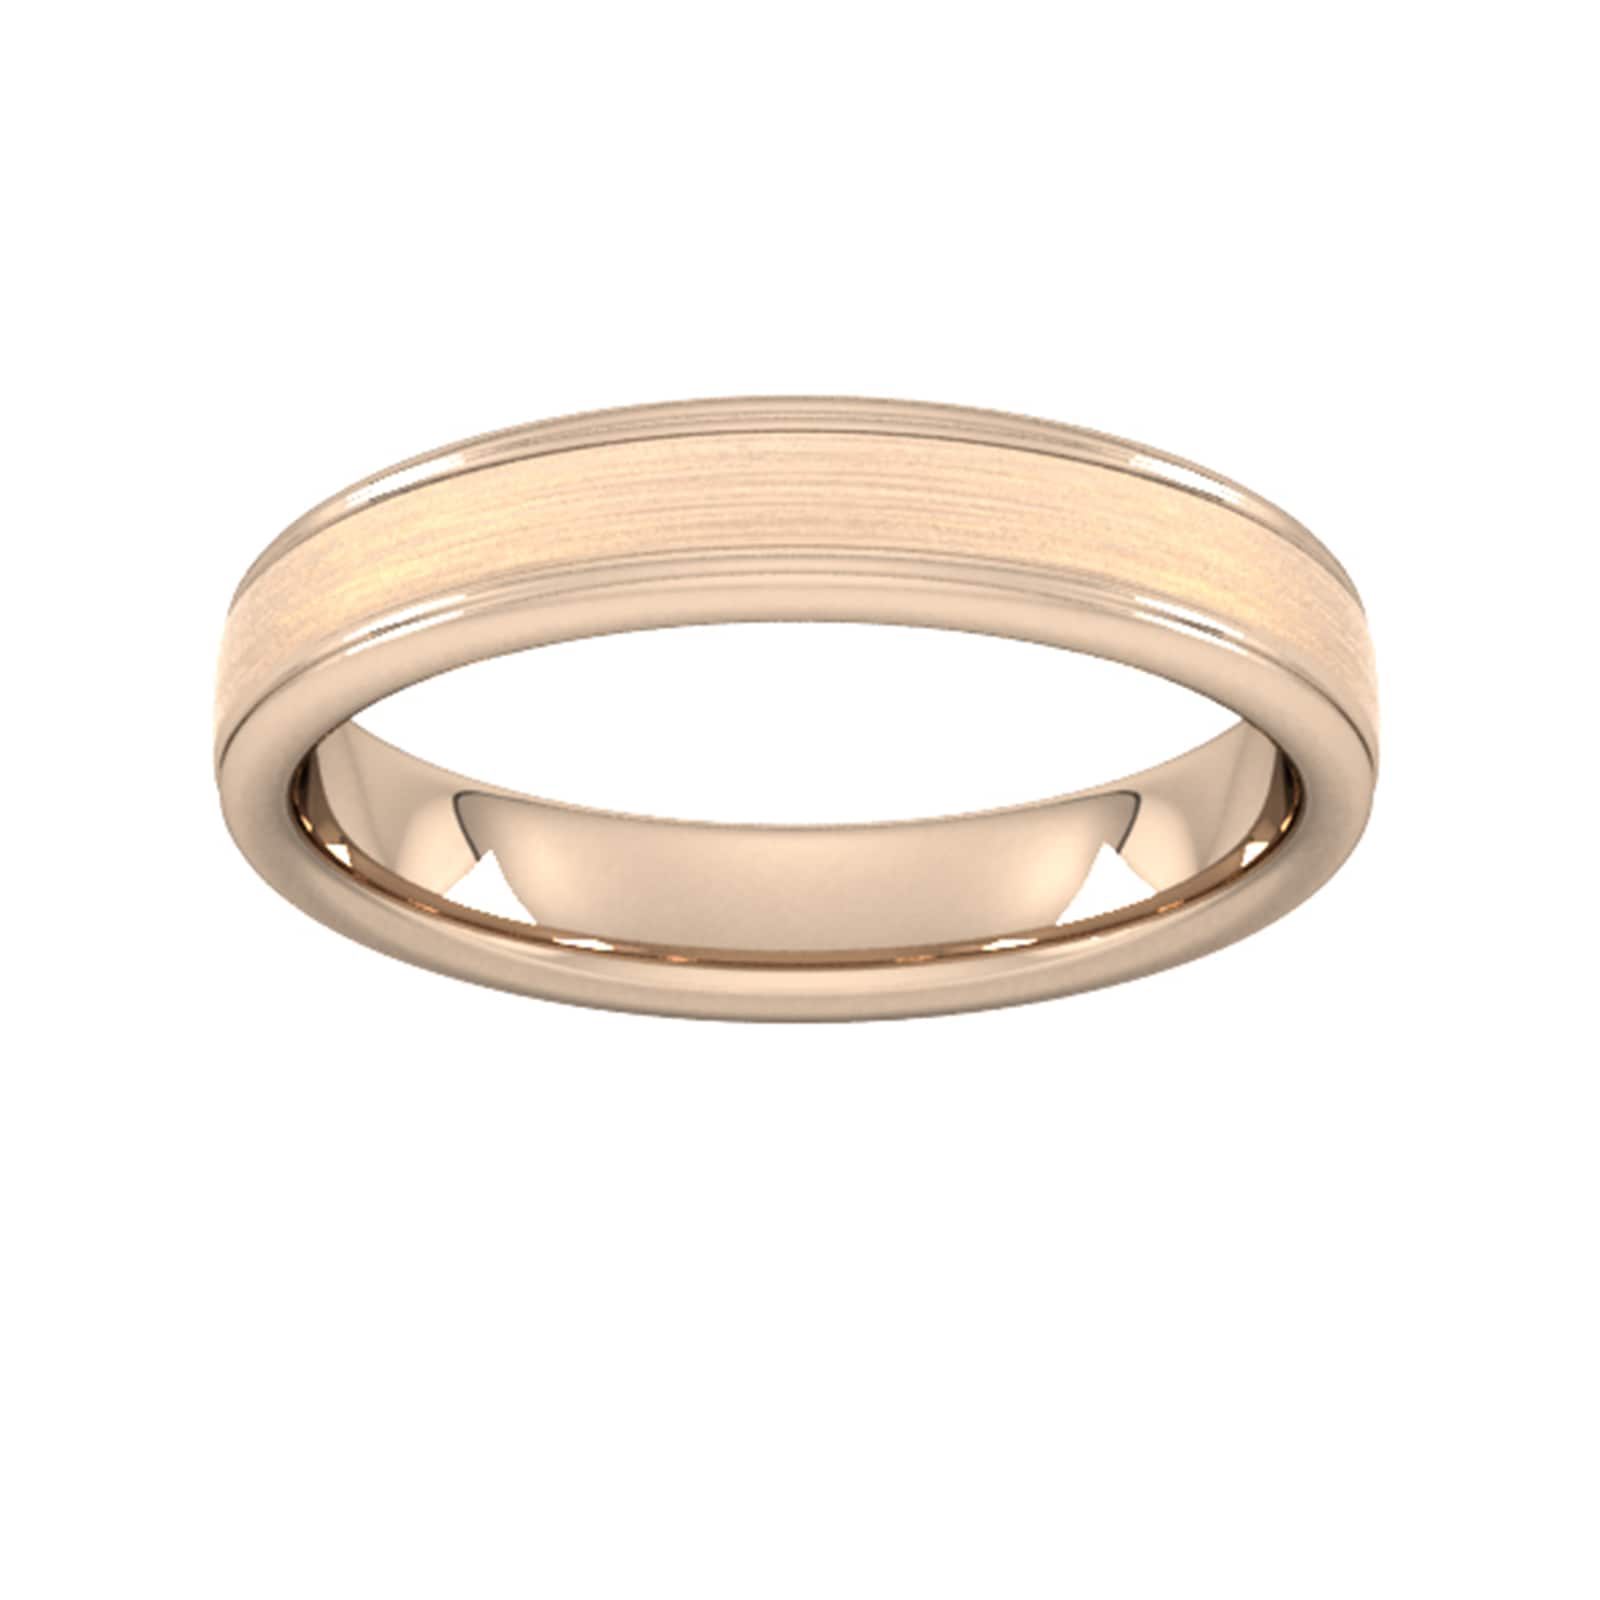 4mm D Shape Standard Matt Centre With Grooves Wedding Ring In 18 Carat Rose Gold - Ring Size S